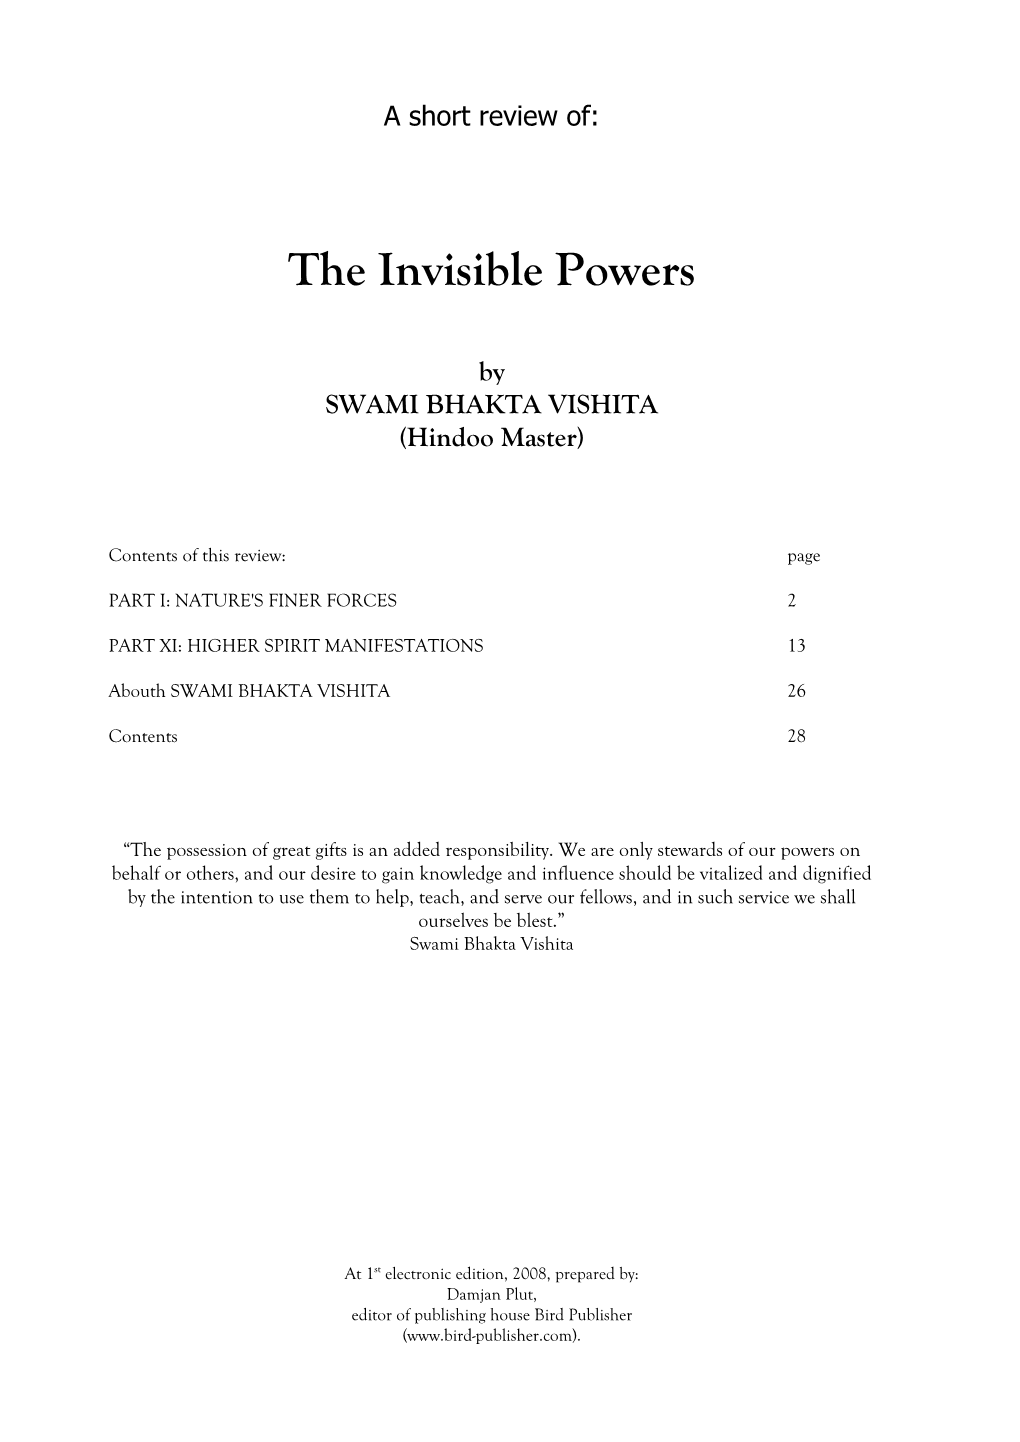 A Short Review of the Invisible Powers